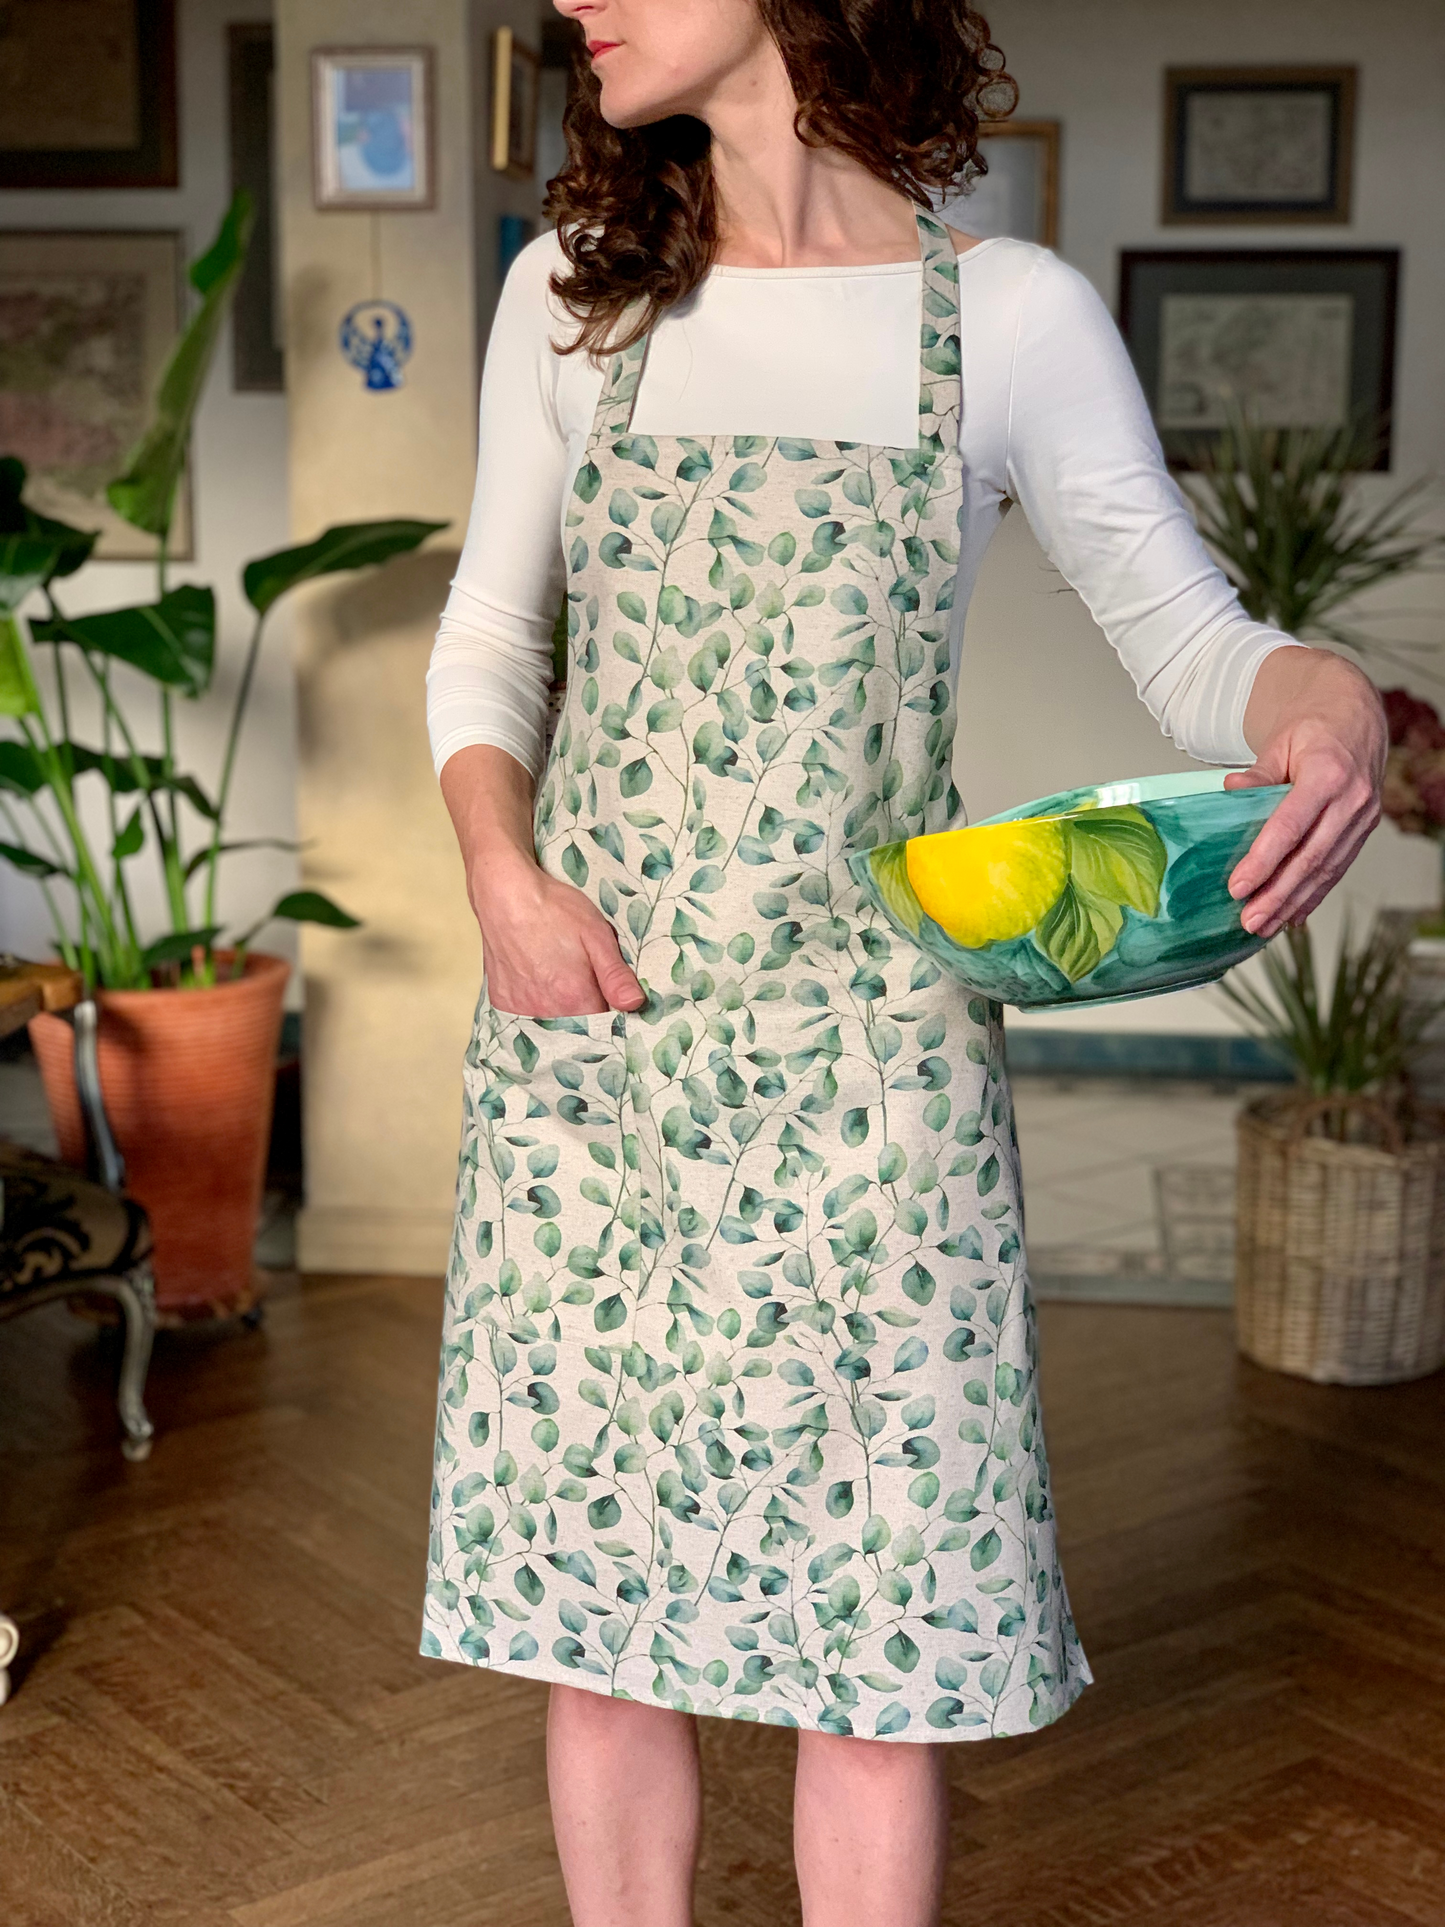 Ladies' Apron Simple, S-L Size, Recycled Cotton, Printed | Verde